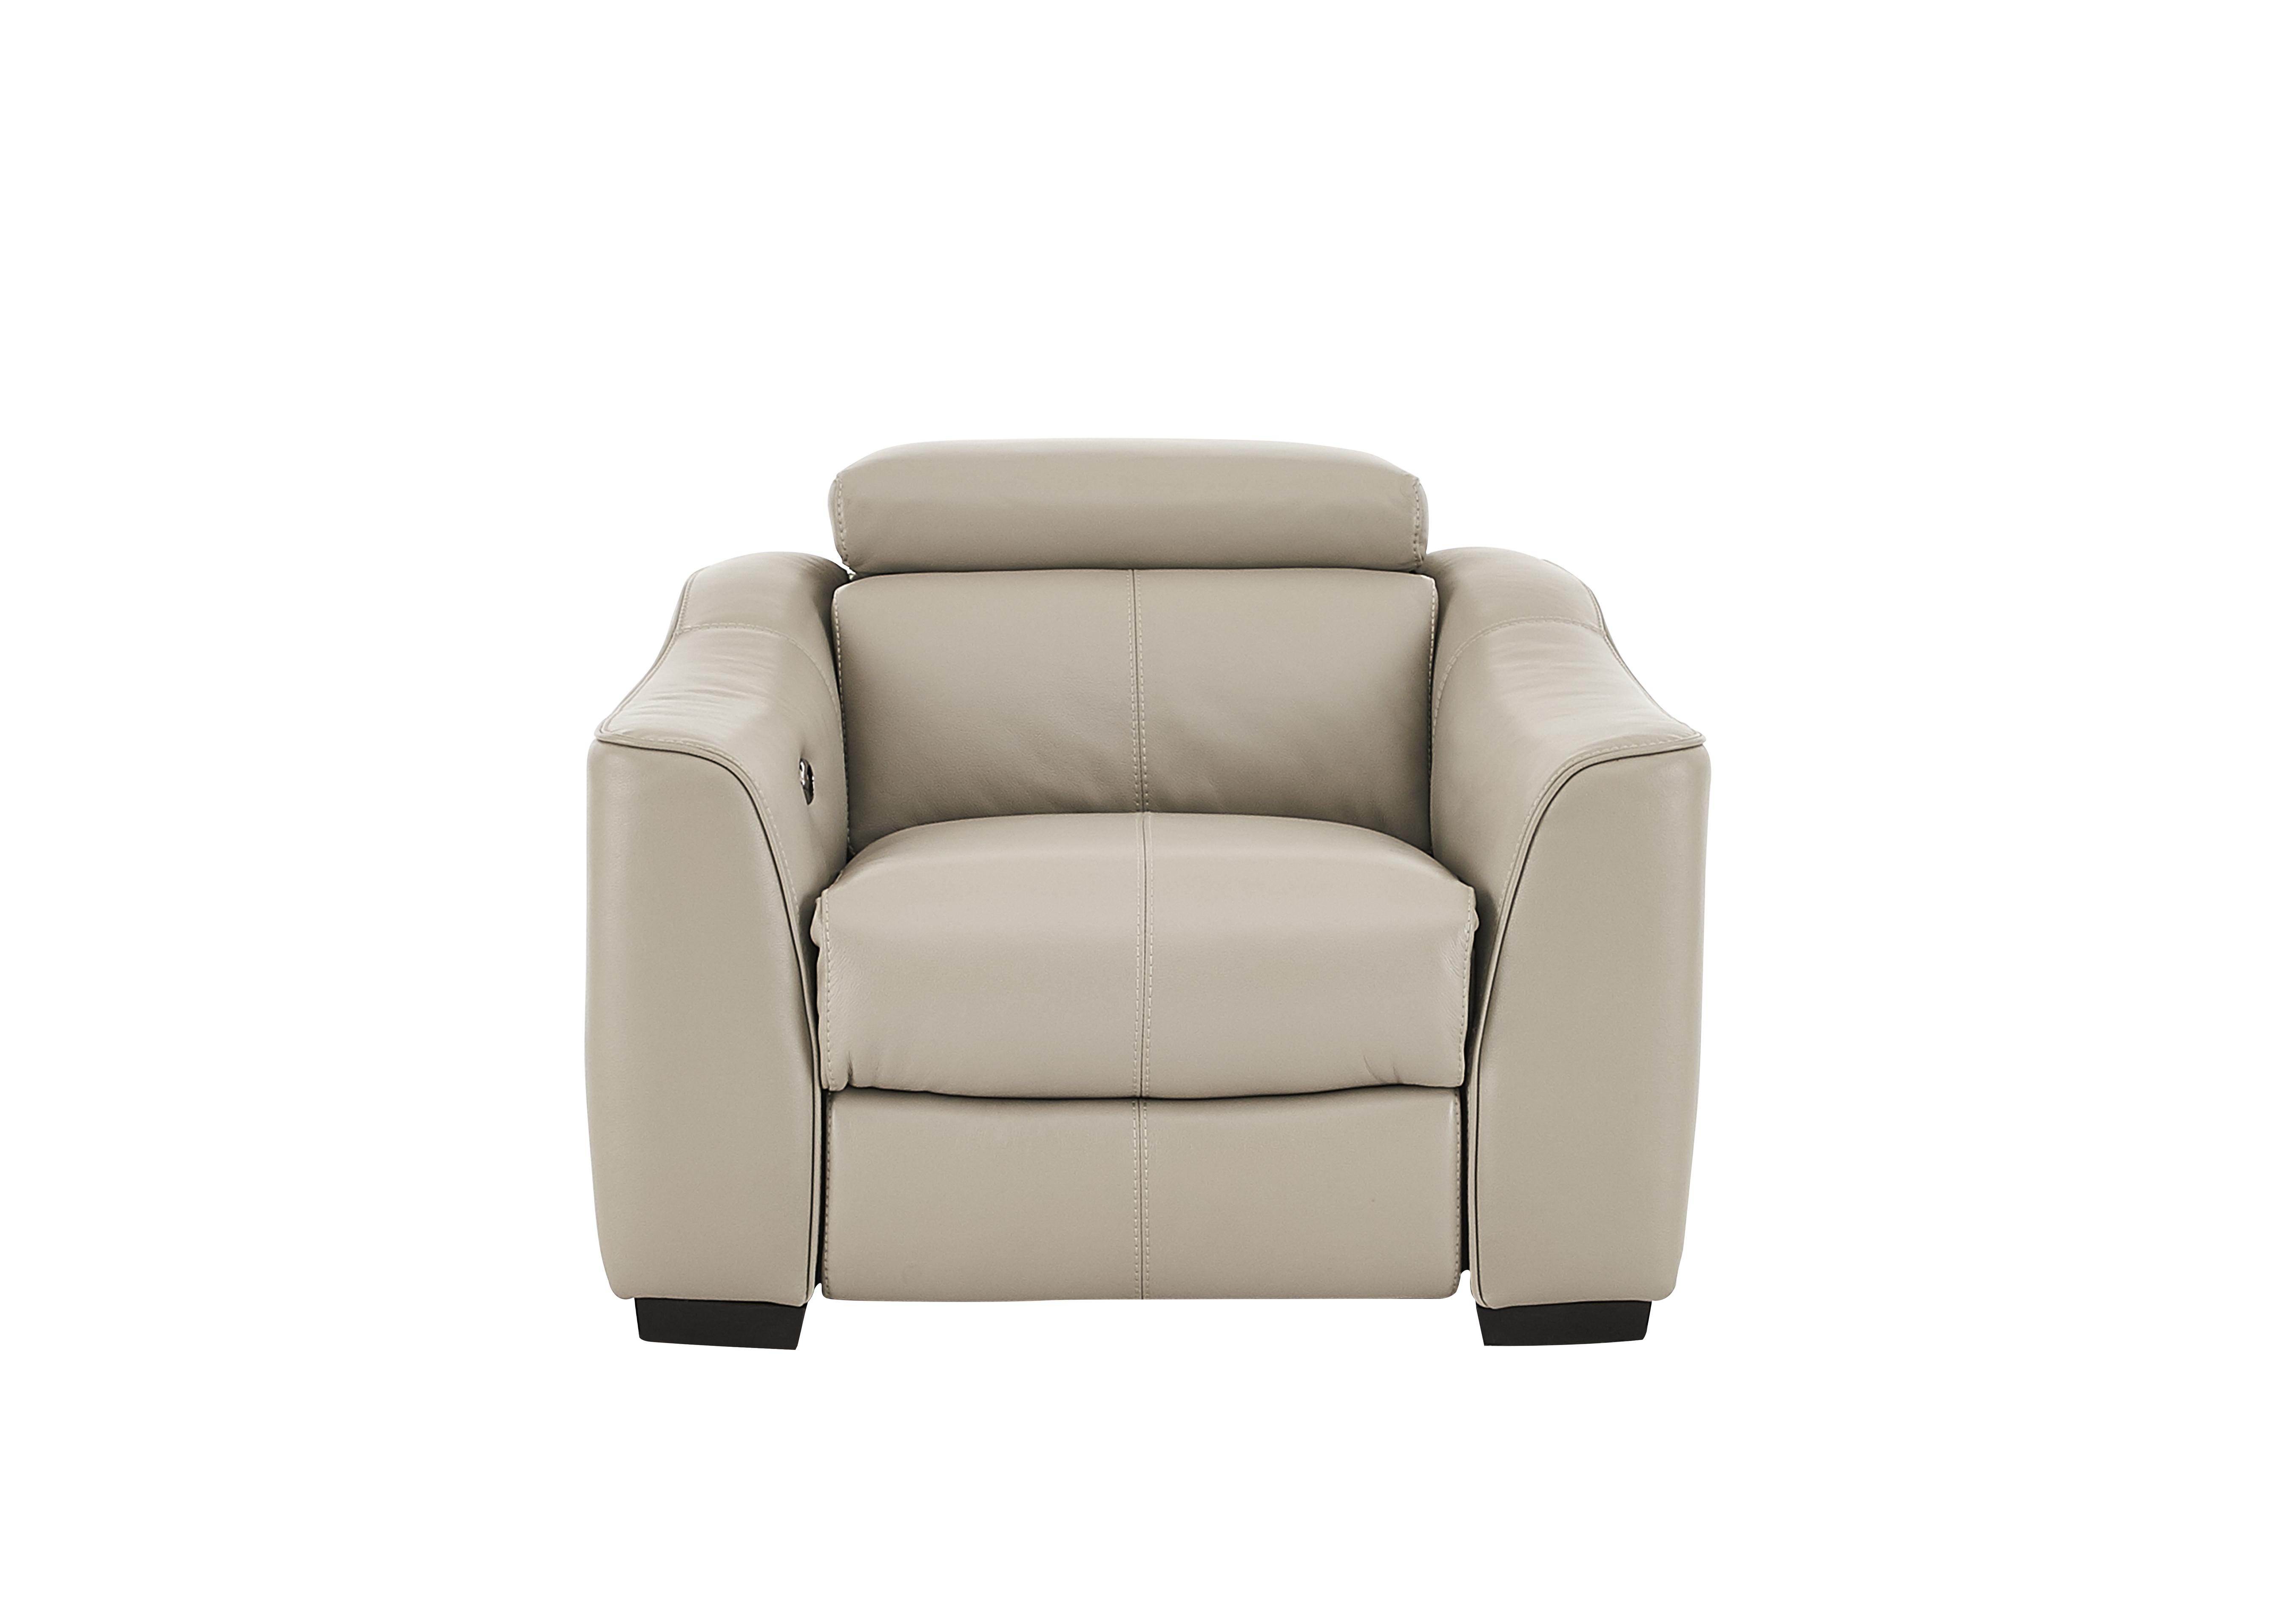 Recliner Chairs Electric Manual Furniture Village